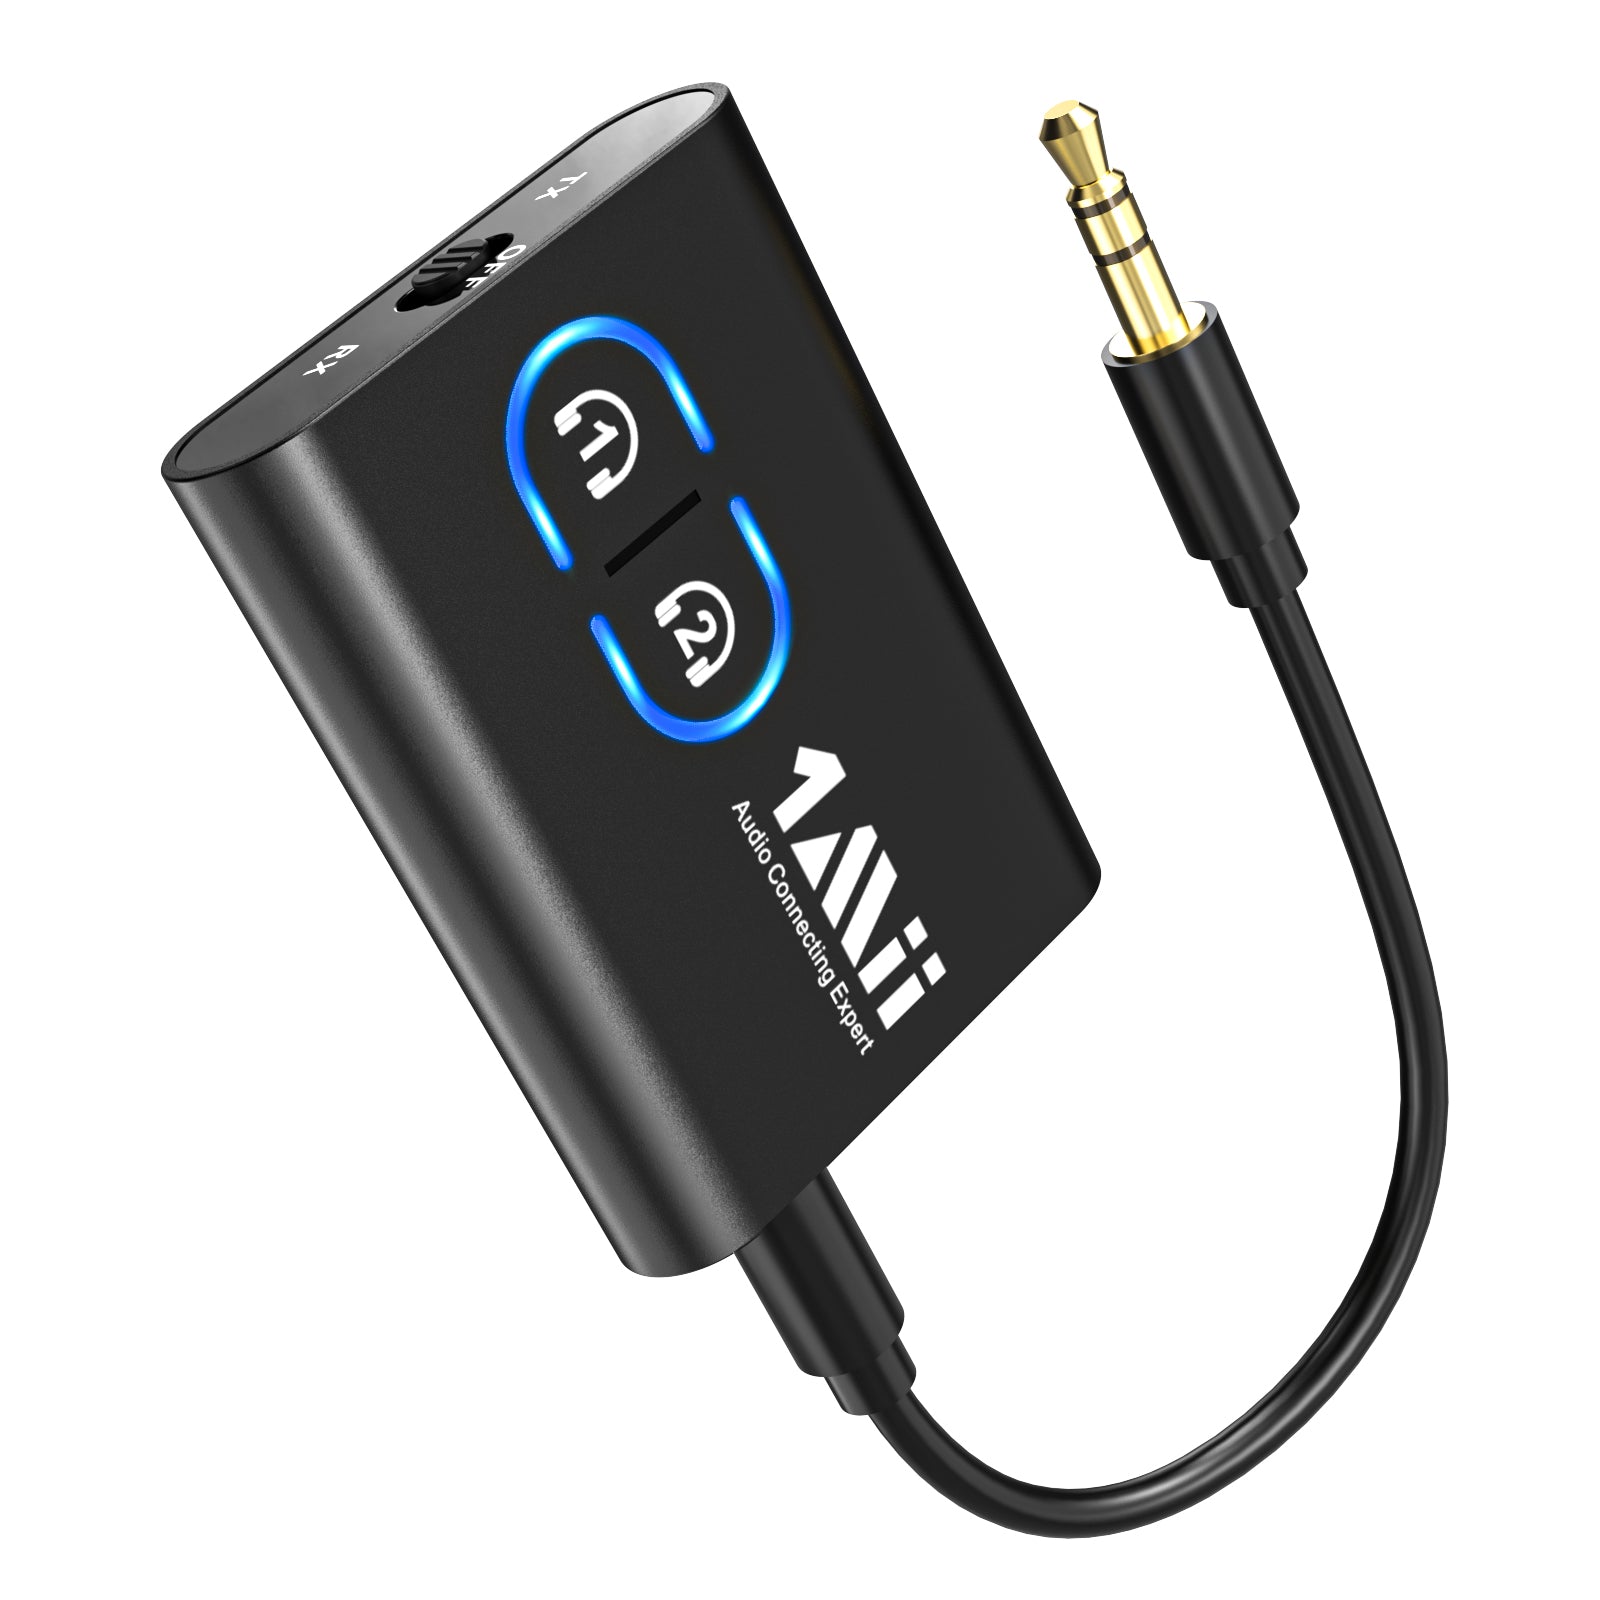 Bluetooth Transmitter Receiver for TV and Portable Use - 1Mii